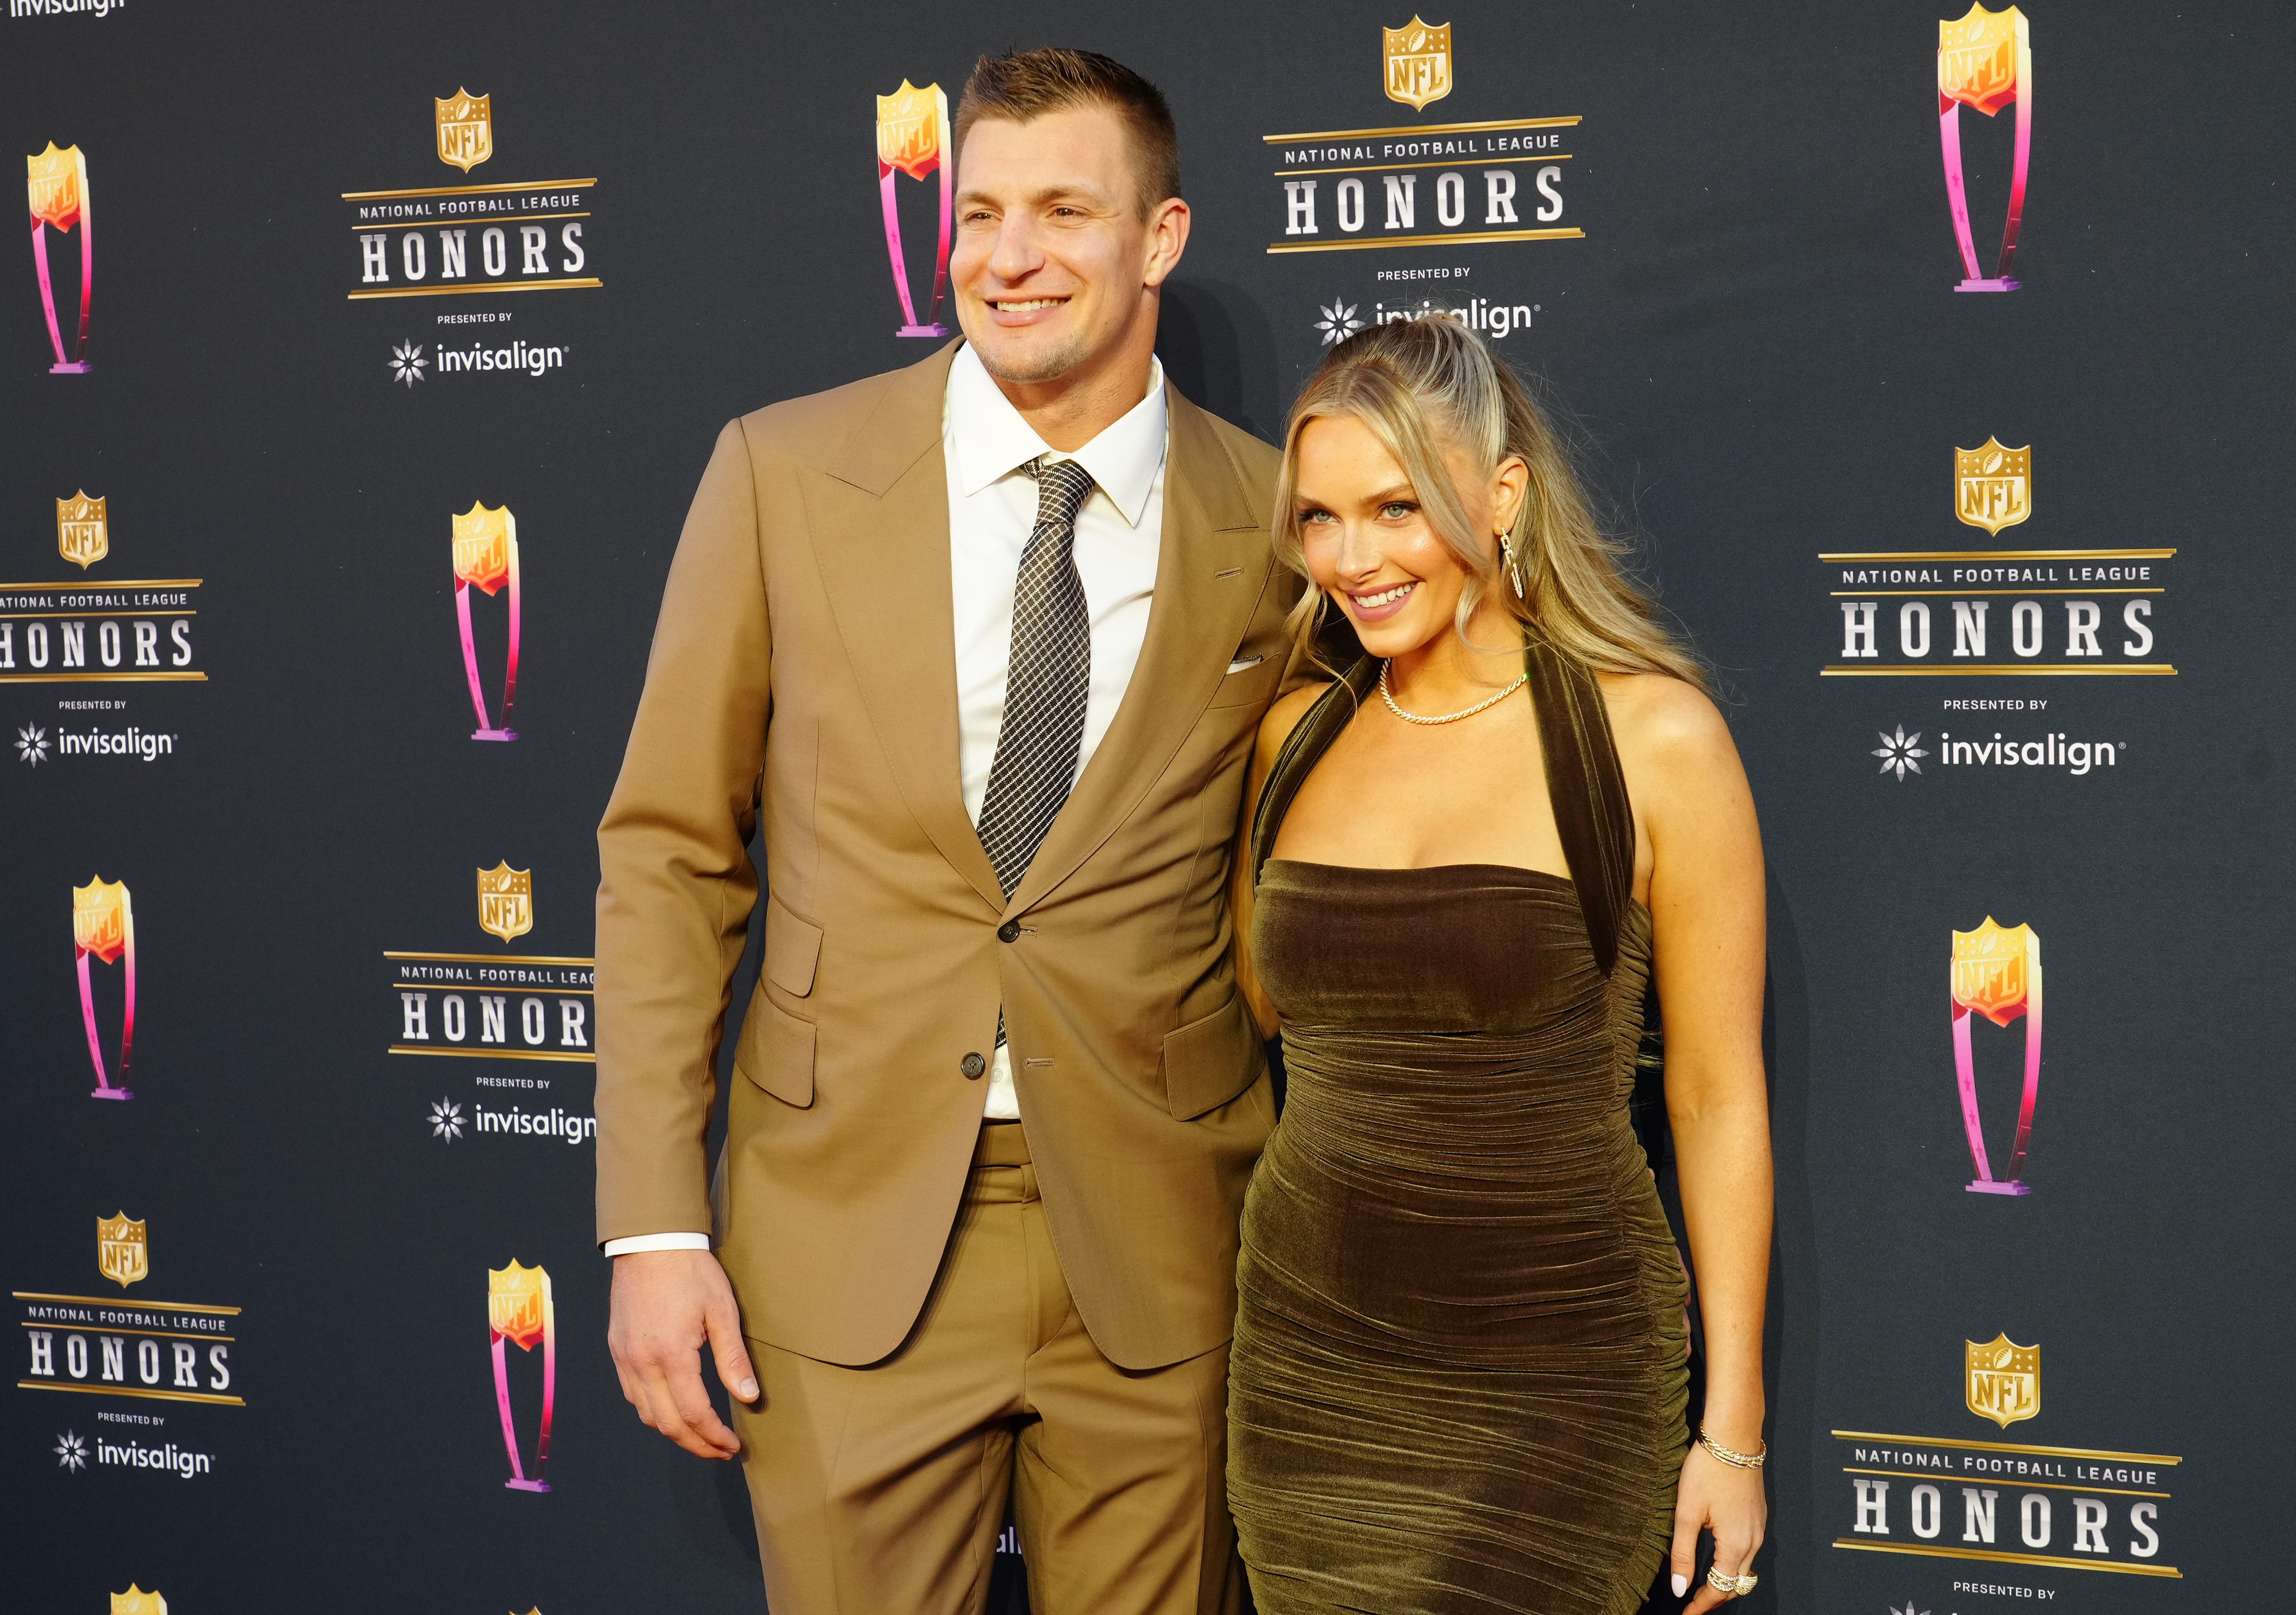 Rob Gronkowski and Camille Kostek pose for a photo on the red carpet at the 11th Annual NFL Honors